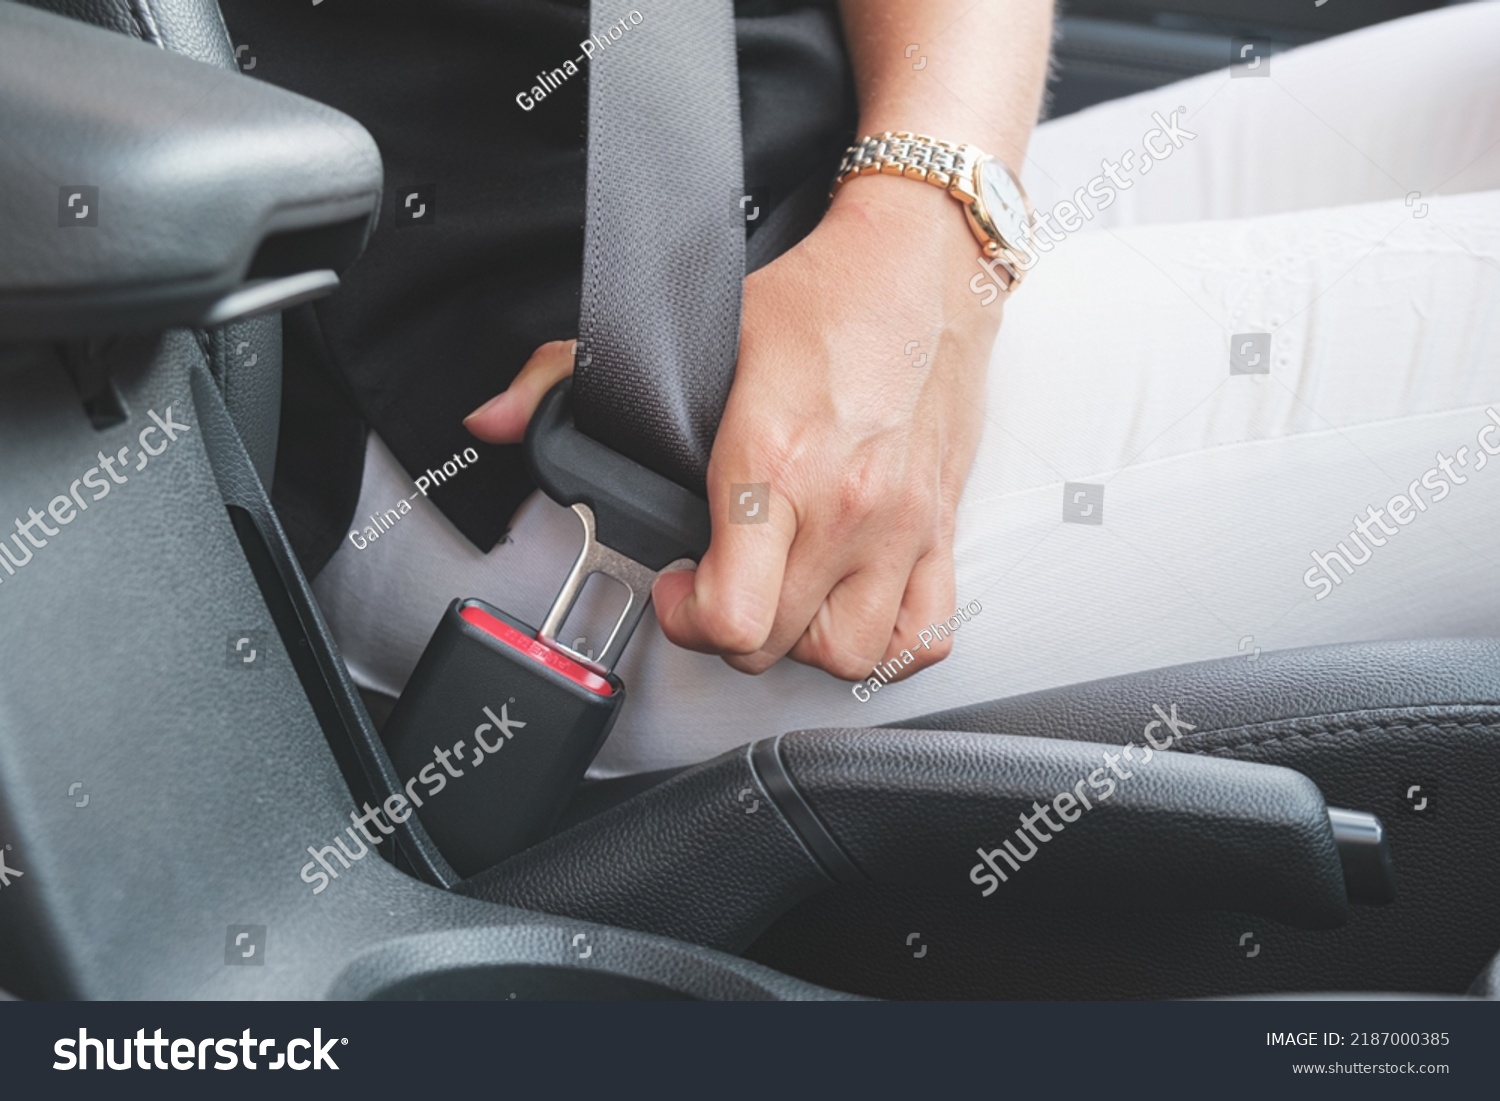 Close-up of a woman's hand fastening a seat belt in a car. Woman driver fastens her seat belt before driving. Driving safety concept. #2187000385